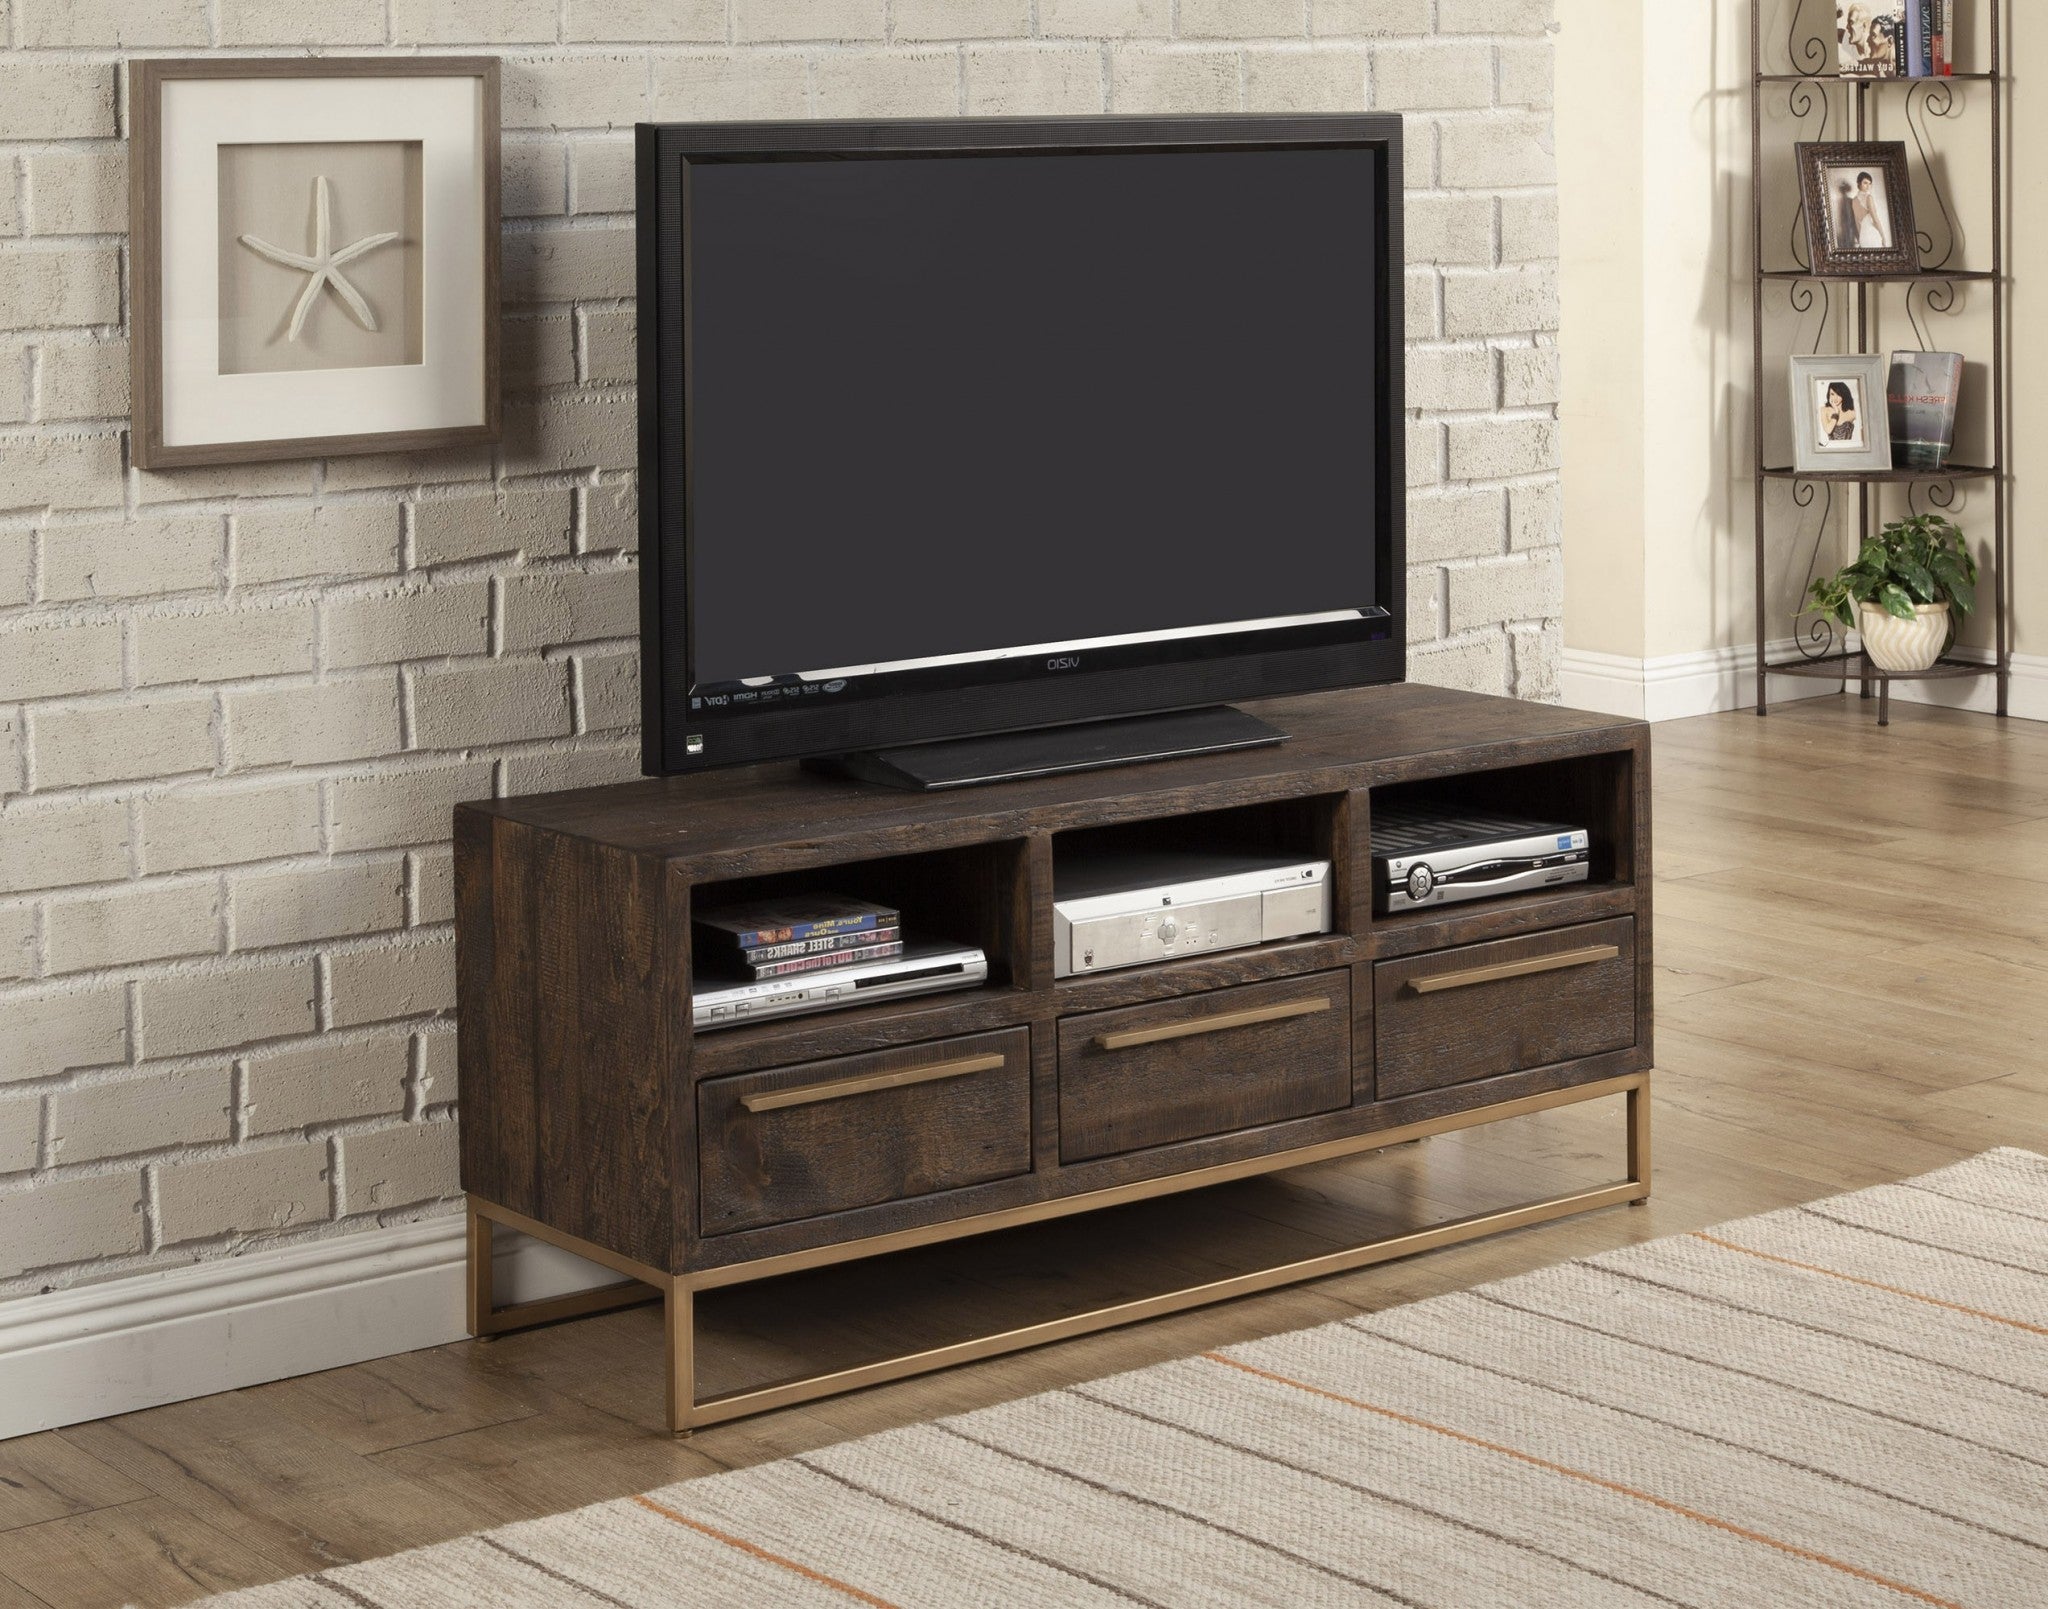 52" Deep Taupe Reclaimed Pine And Plywood Open Shelving TV Stand